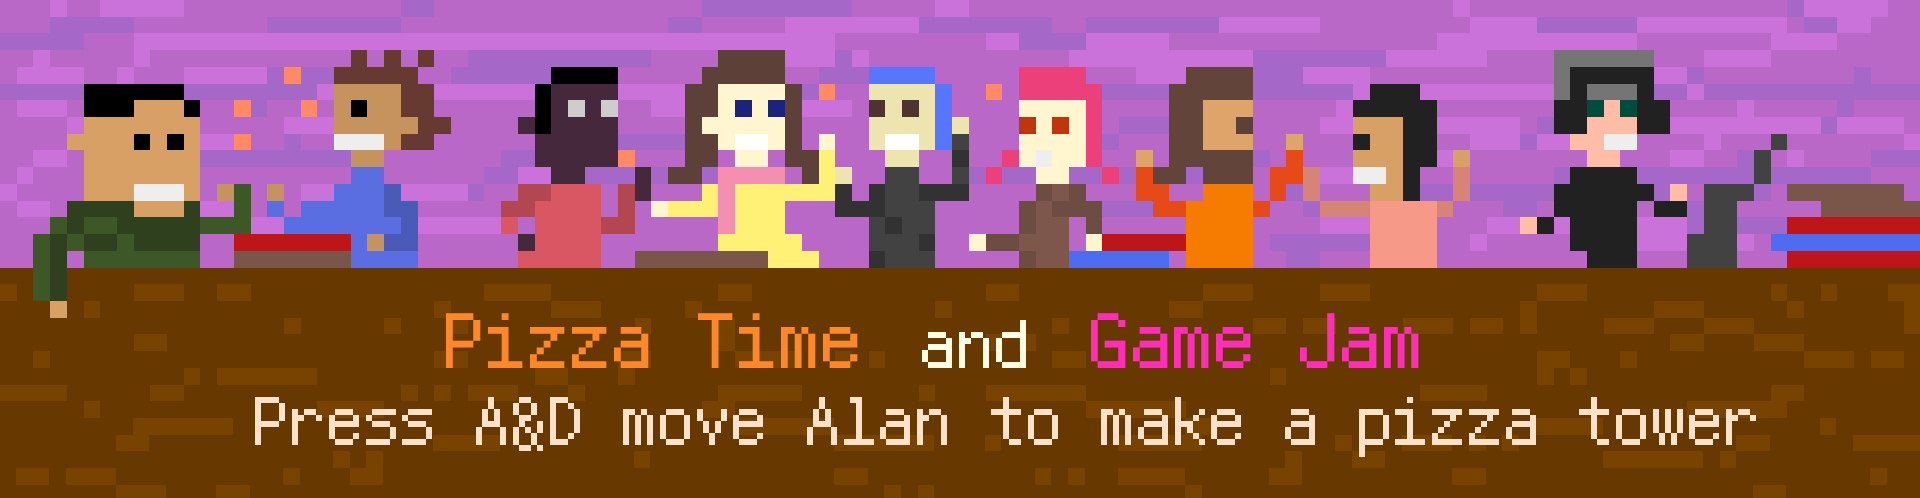 Pizza time and Game jam